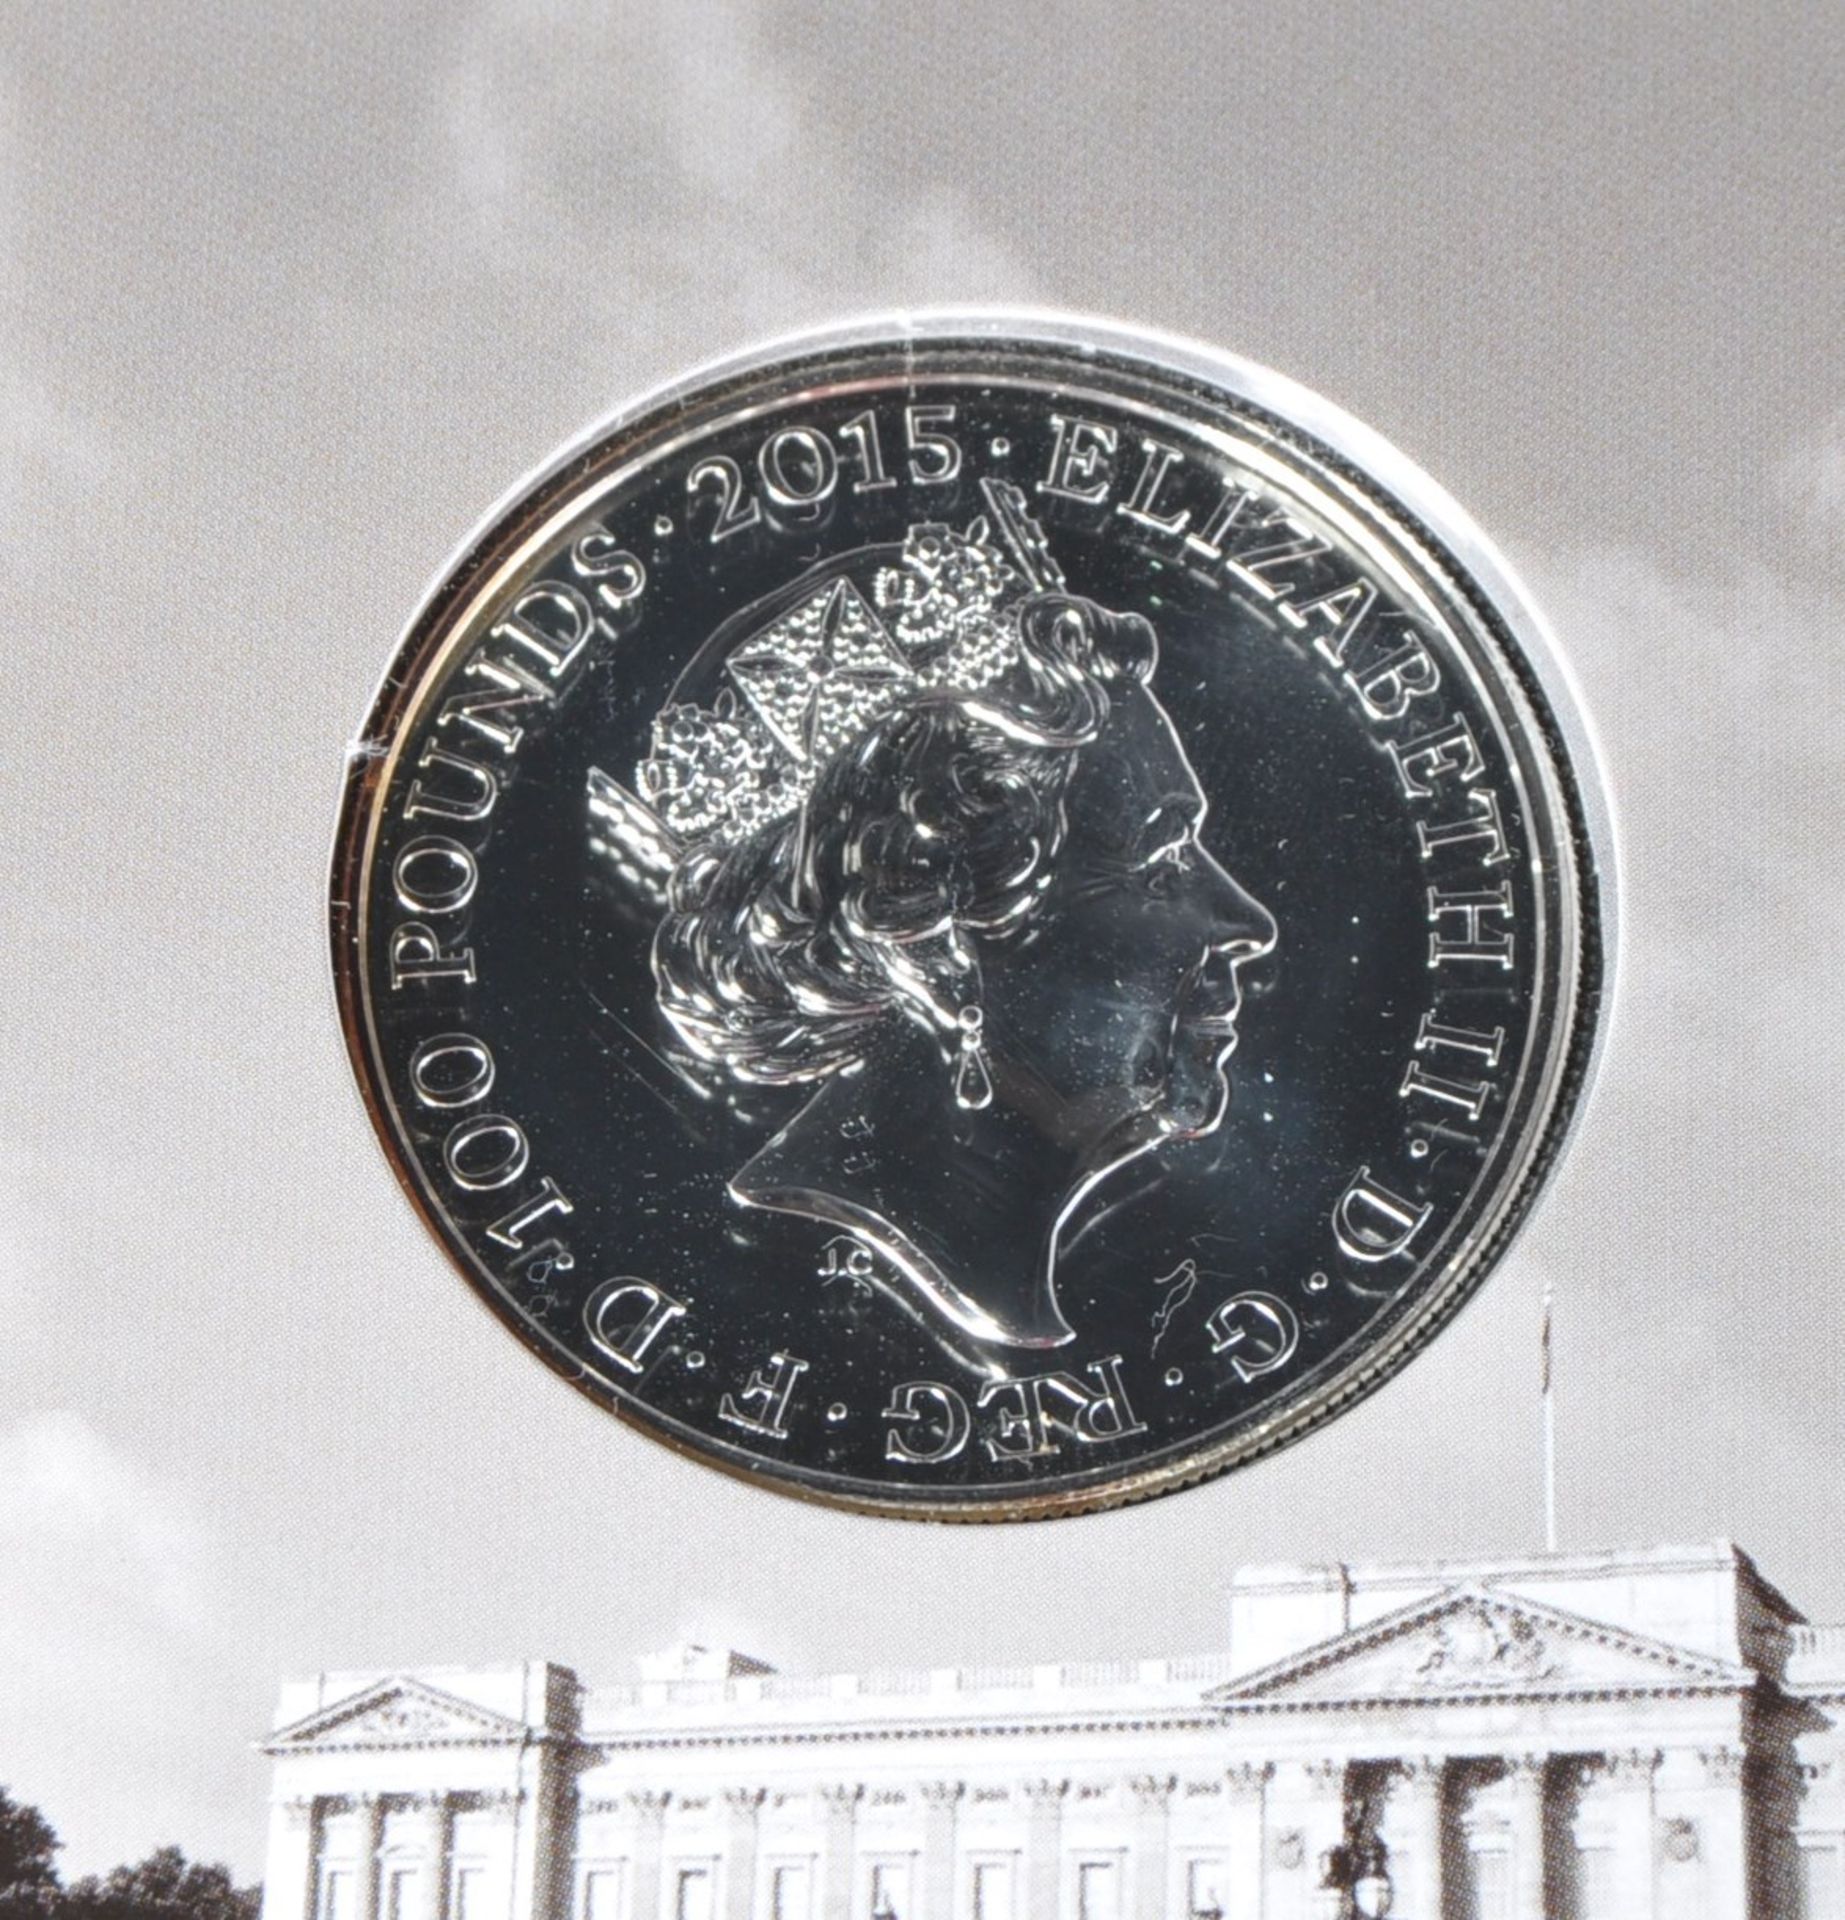 COINS - THE ROYAL MINT - 2015 BUCKINGHAM PALACE £100 SILVER COIN - Image 3 of 3